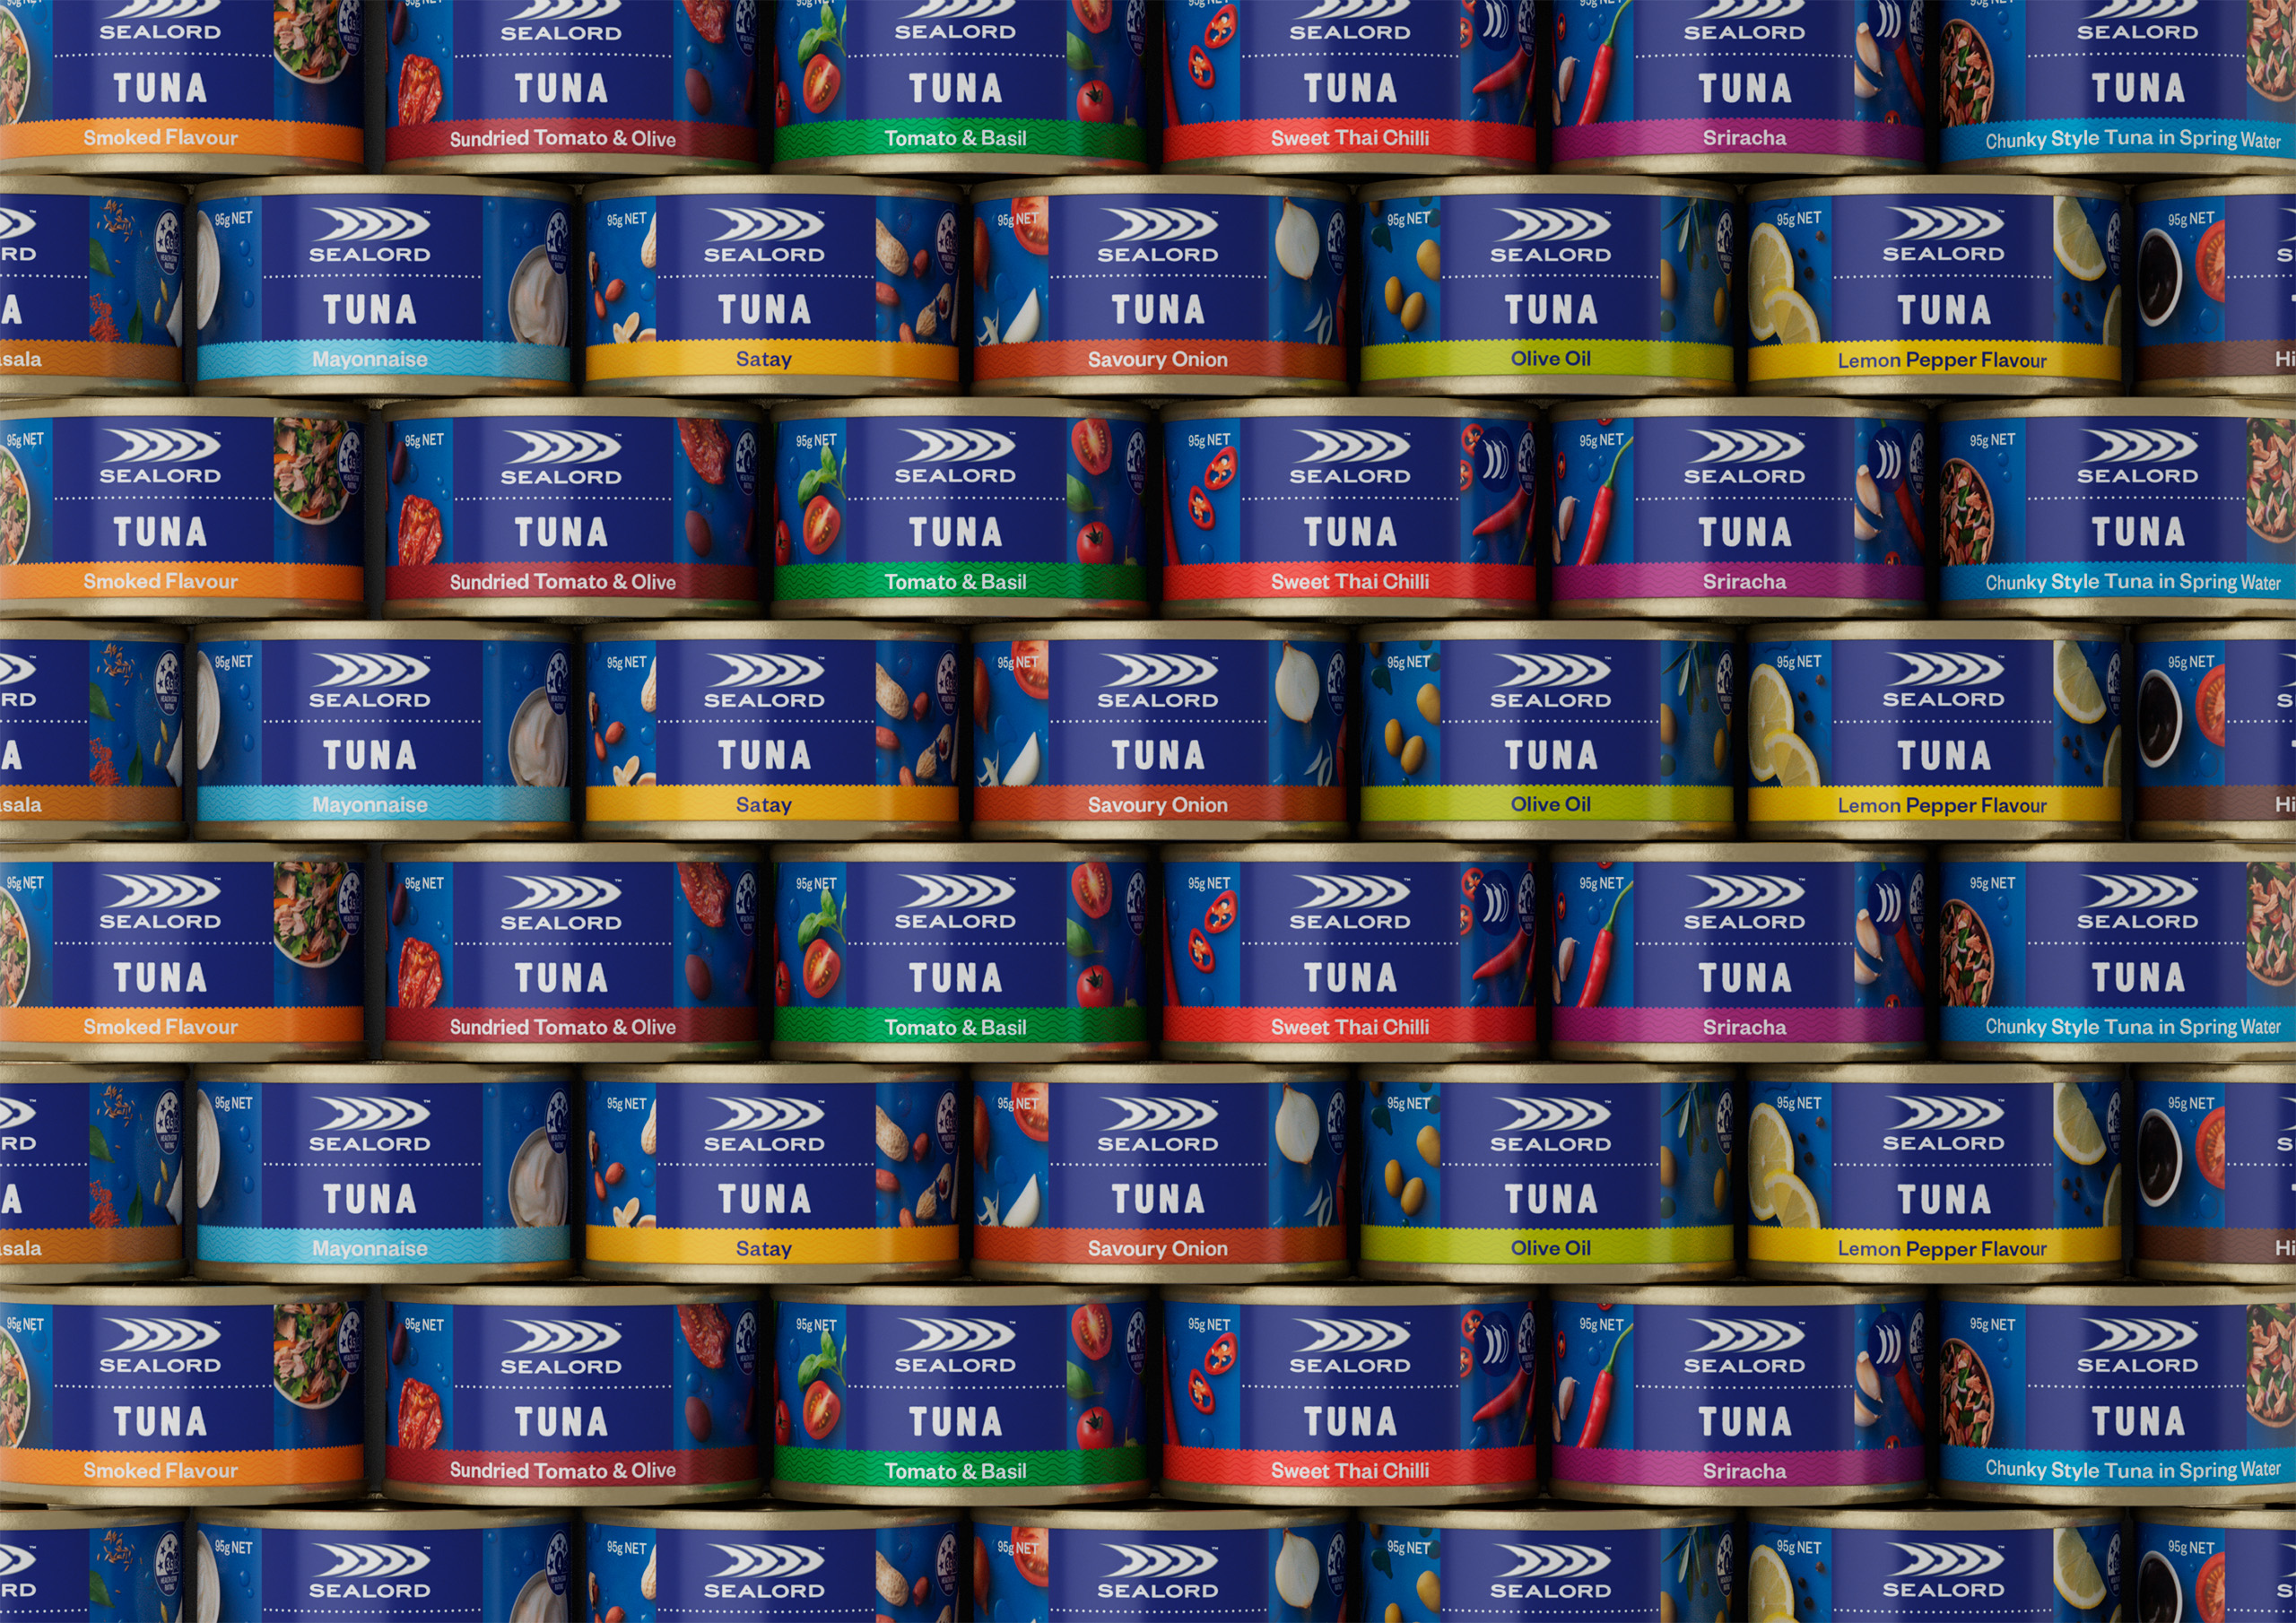 Wall-of-Cans-01